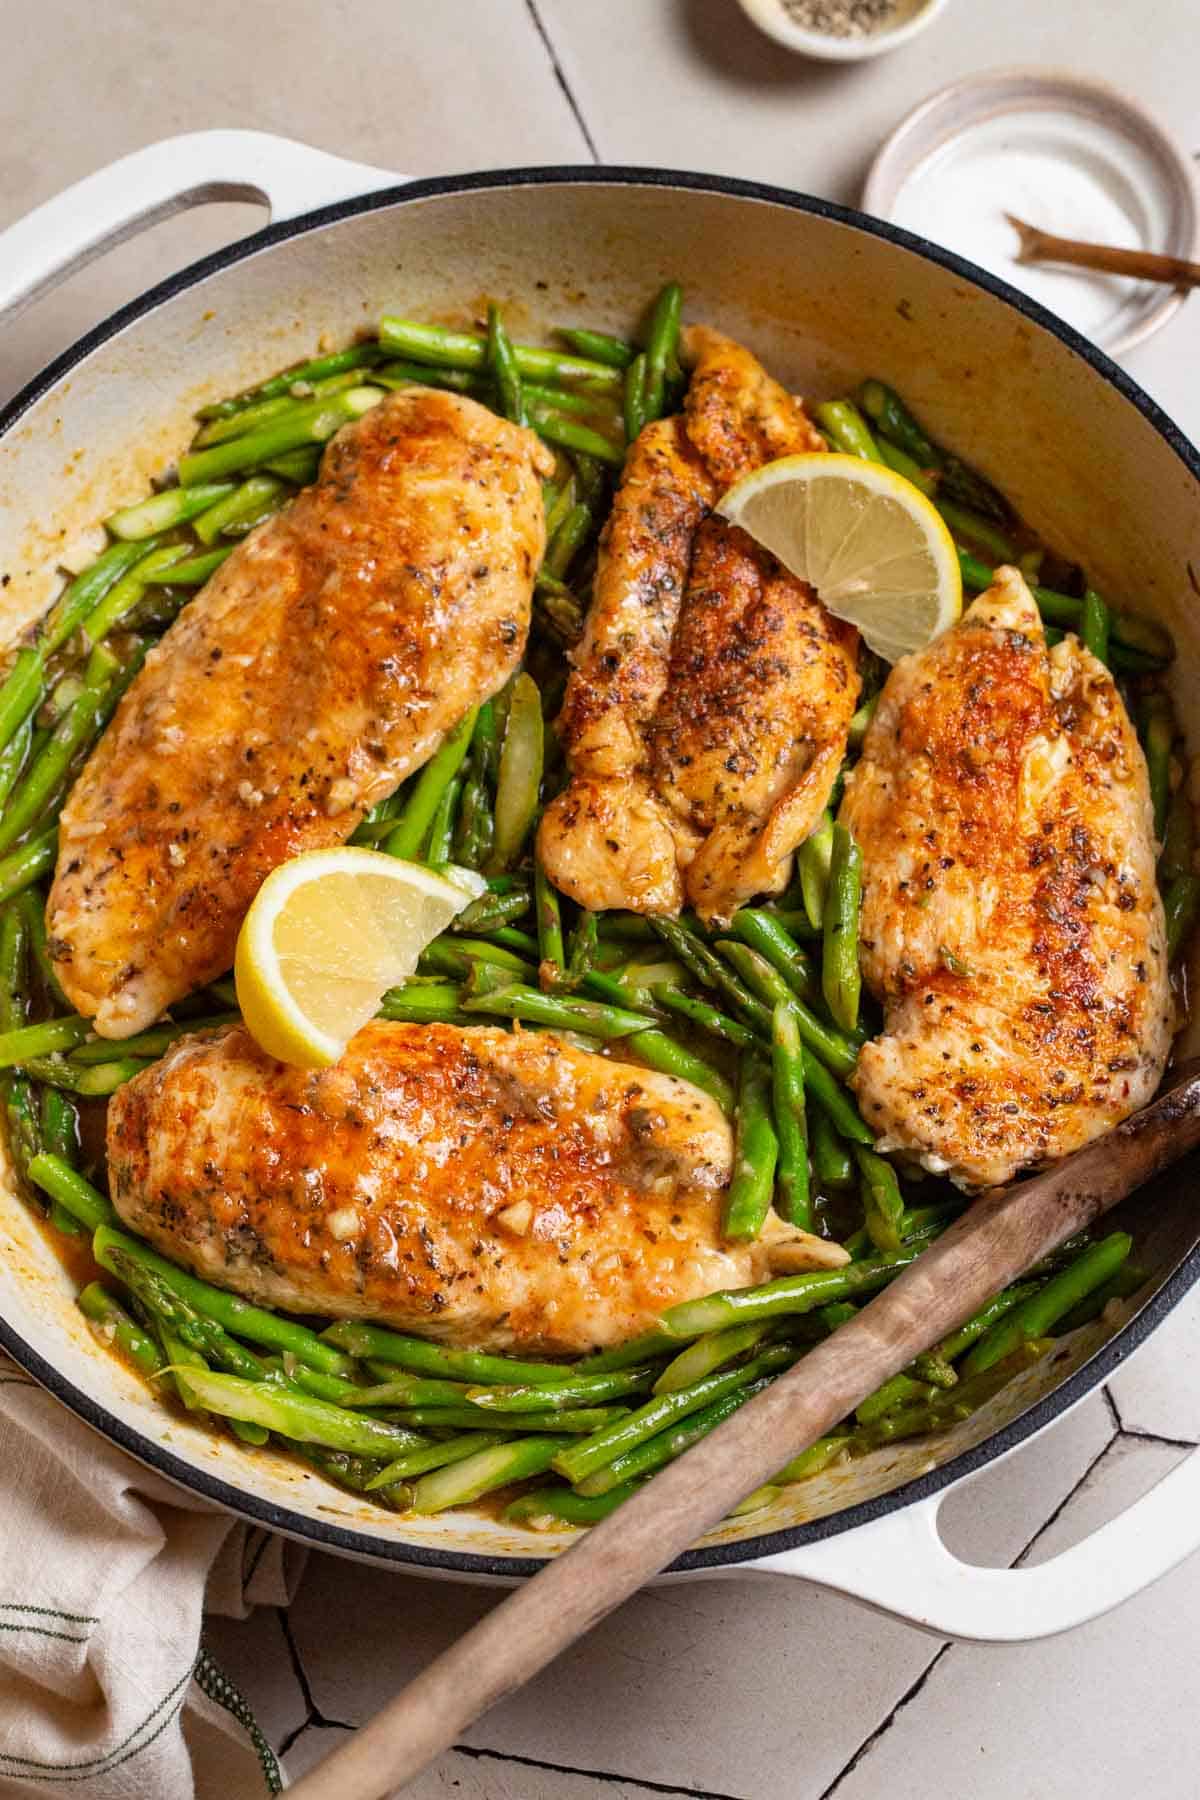 Chicken and asparagus in a skillet with lemon wedges and a wooden spoon. Next to this are two small bowls with salt and pepper.